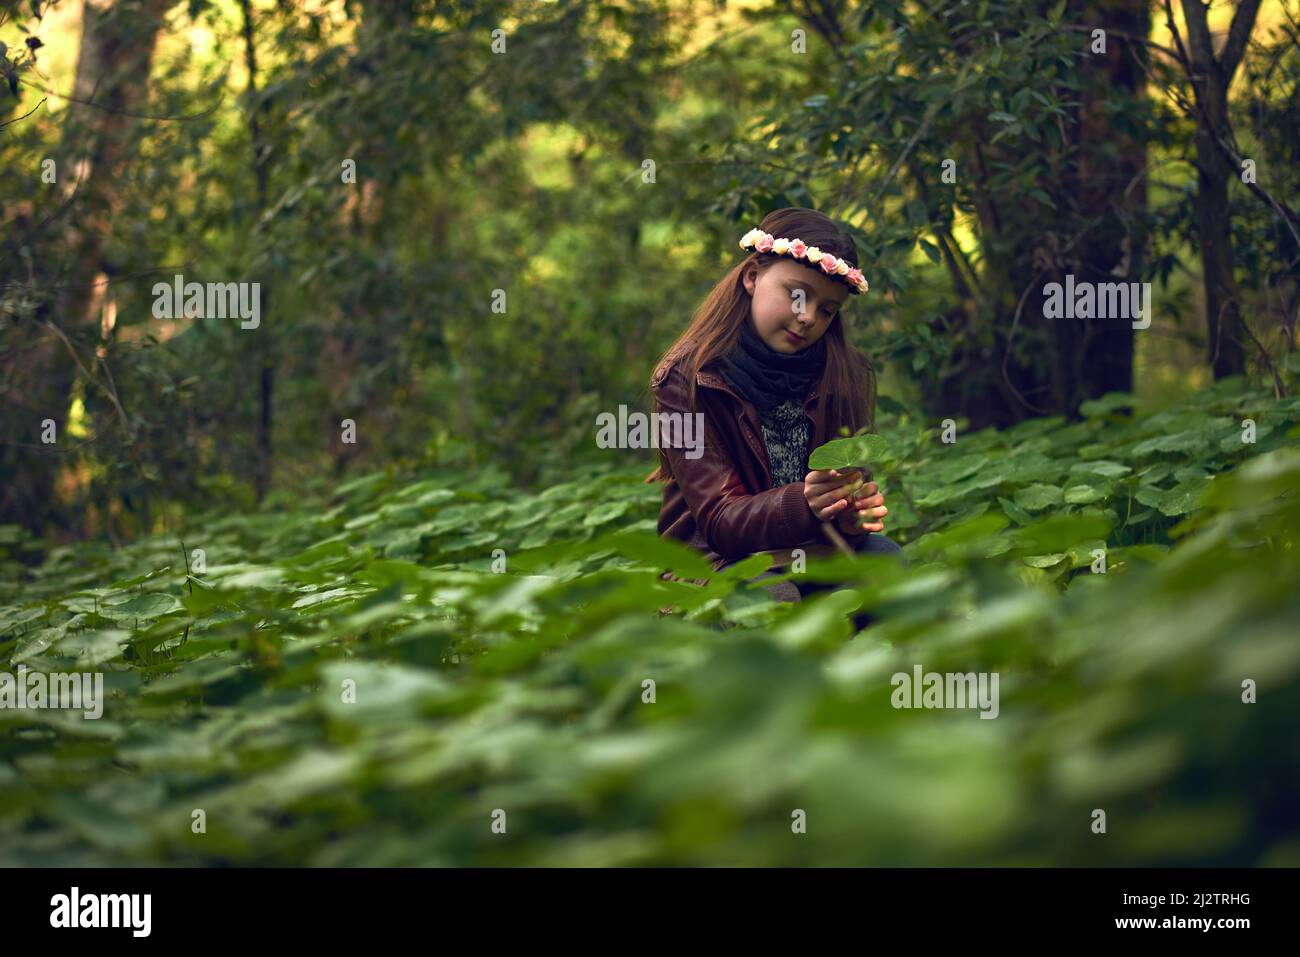 She believes in nurturing nature. Shot of a little girl playing outdoors in a forest. Stock Photo